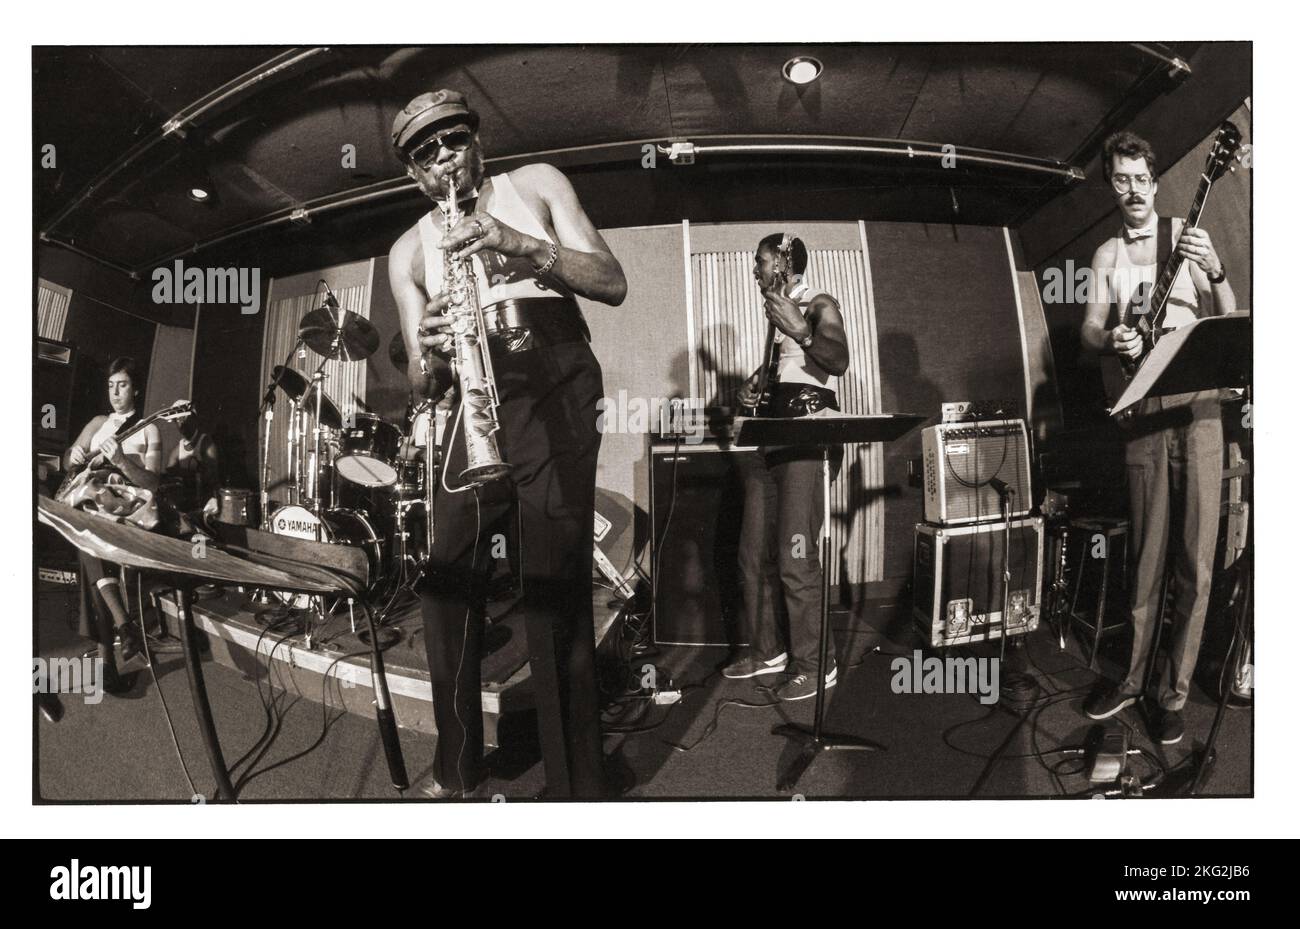 A 1986 fisheye lens photo of jazz saxophonist Julius Hemphill playing his soprano saxophone at a showcase for industry people. In a Manhattan studio. With bill Frisell on guitar. Stock Photo